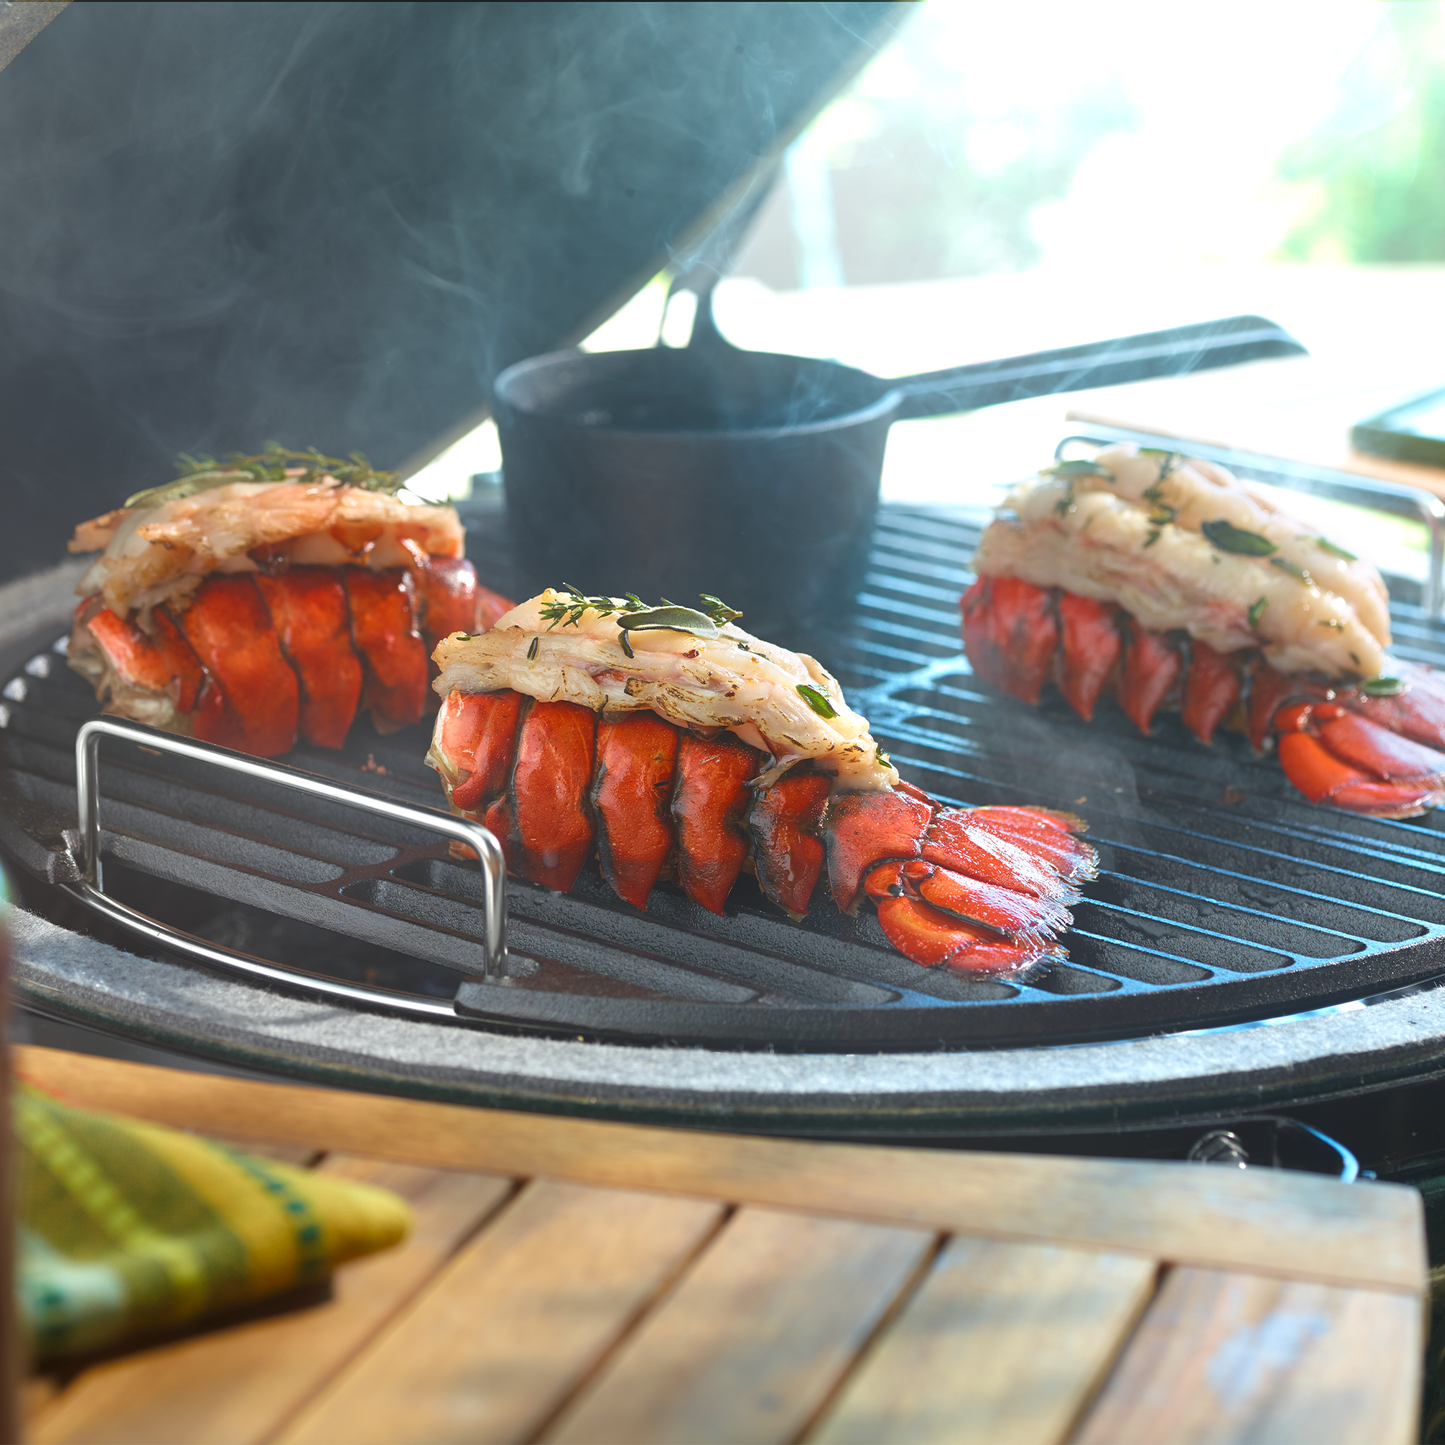 Buy One, Get One Free Large Lobster Tails (5-6oz) + Free Shipping